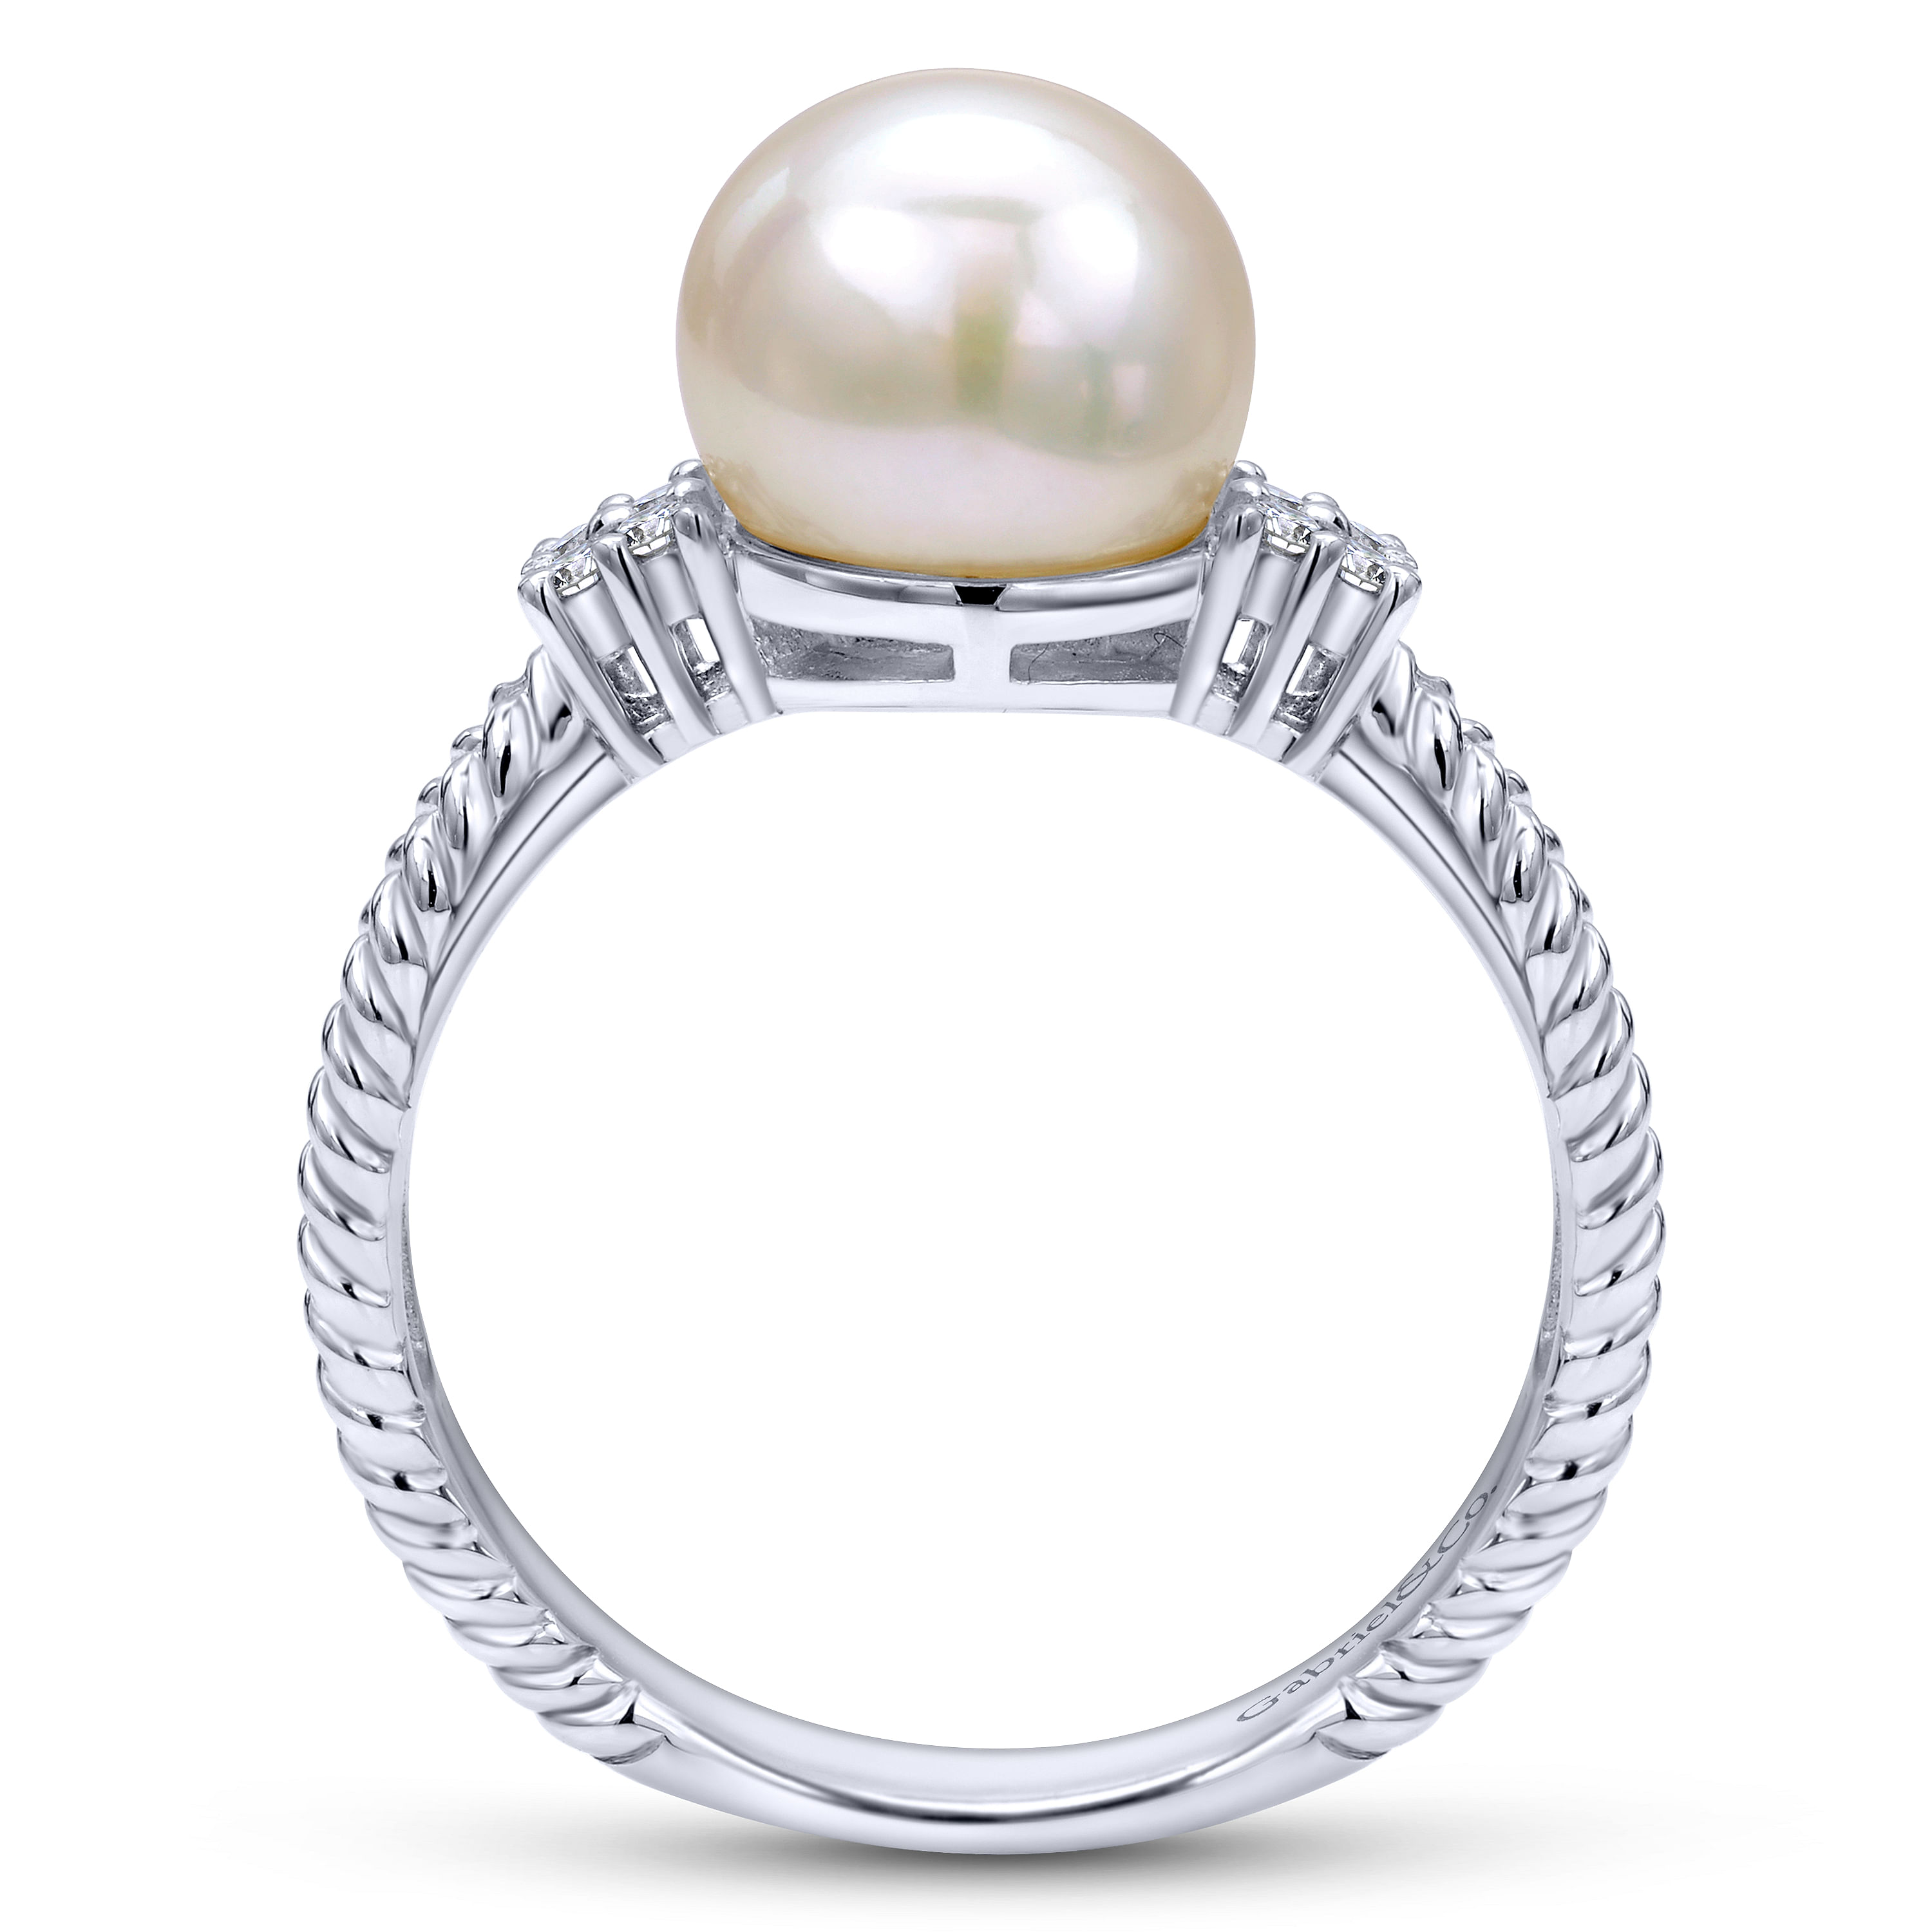 14K White Gold Cultured Pearl and Diamond Ring with Twisted Rope Shank